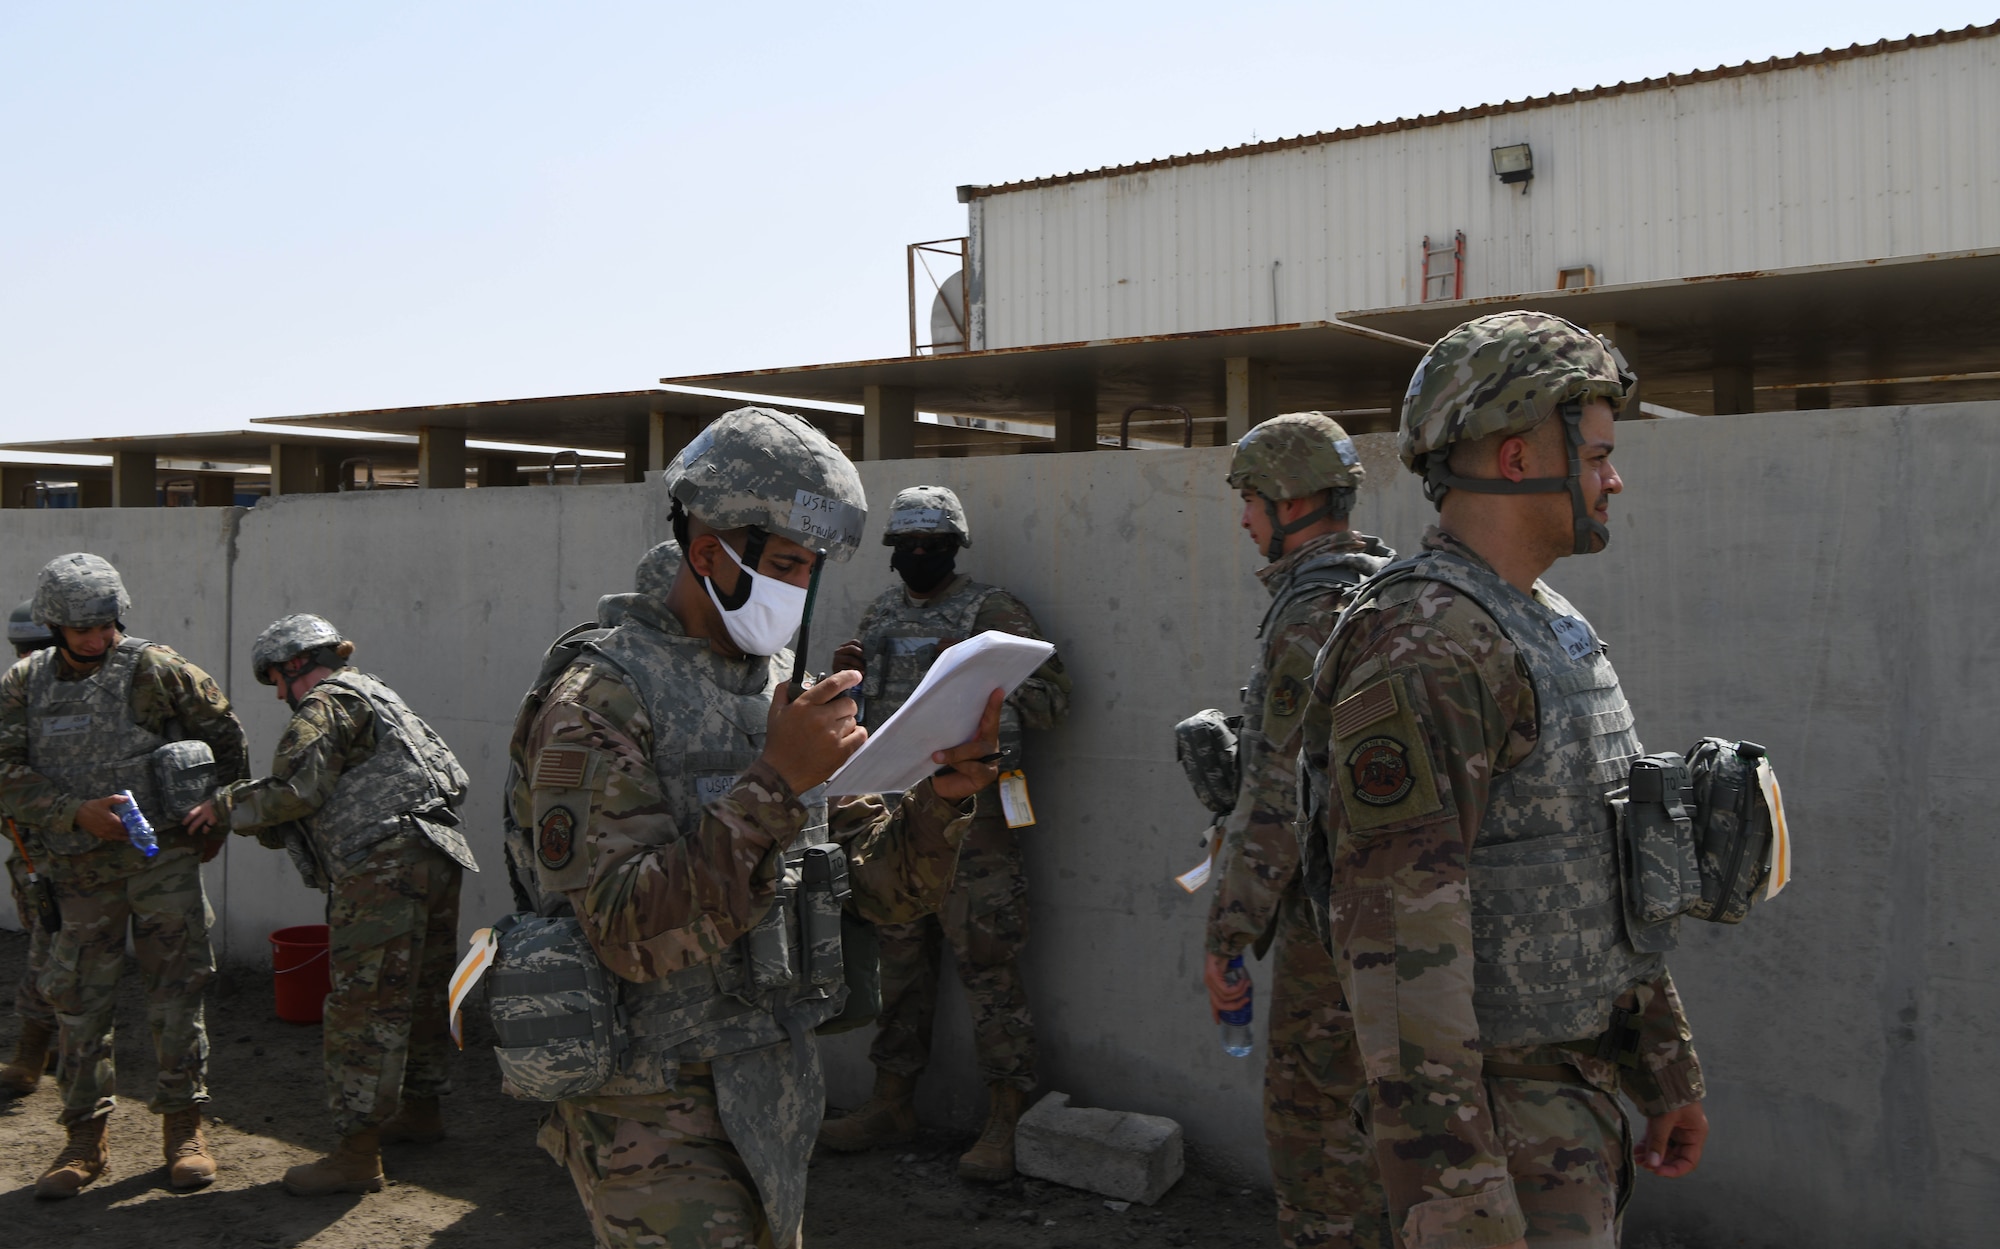 Airmen from the 380th Expeditionary Civil Engineer Squadron go through accountability checklists after a bunker dive during a rotational exercise July 21, 2020, at Al Dhafra Air Base, United Arab Emirates. The exercise gives deployers an opportunity to execute some of the techniques taught to them during training at home station. (U.S. Air Force photo by Tech. Sgt. Charles Taylor)